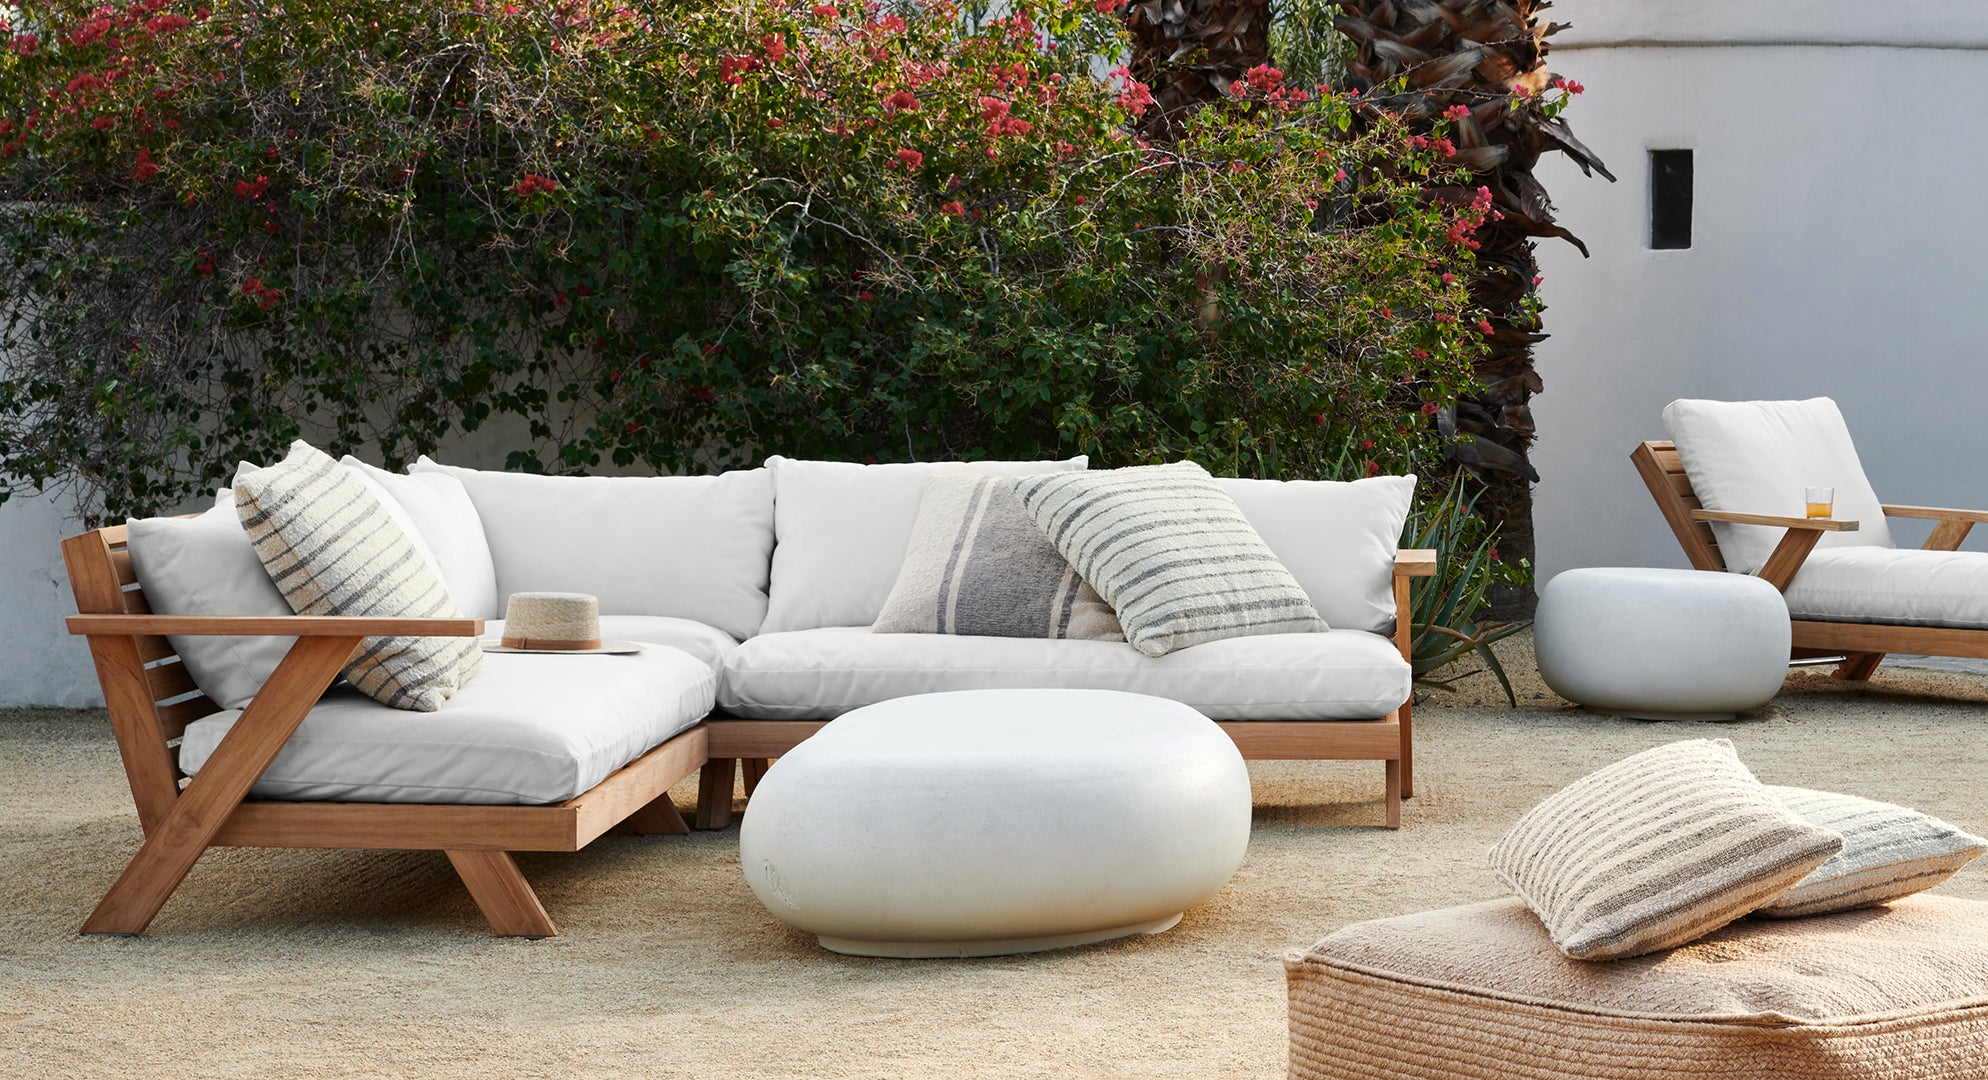 outdoor sectional